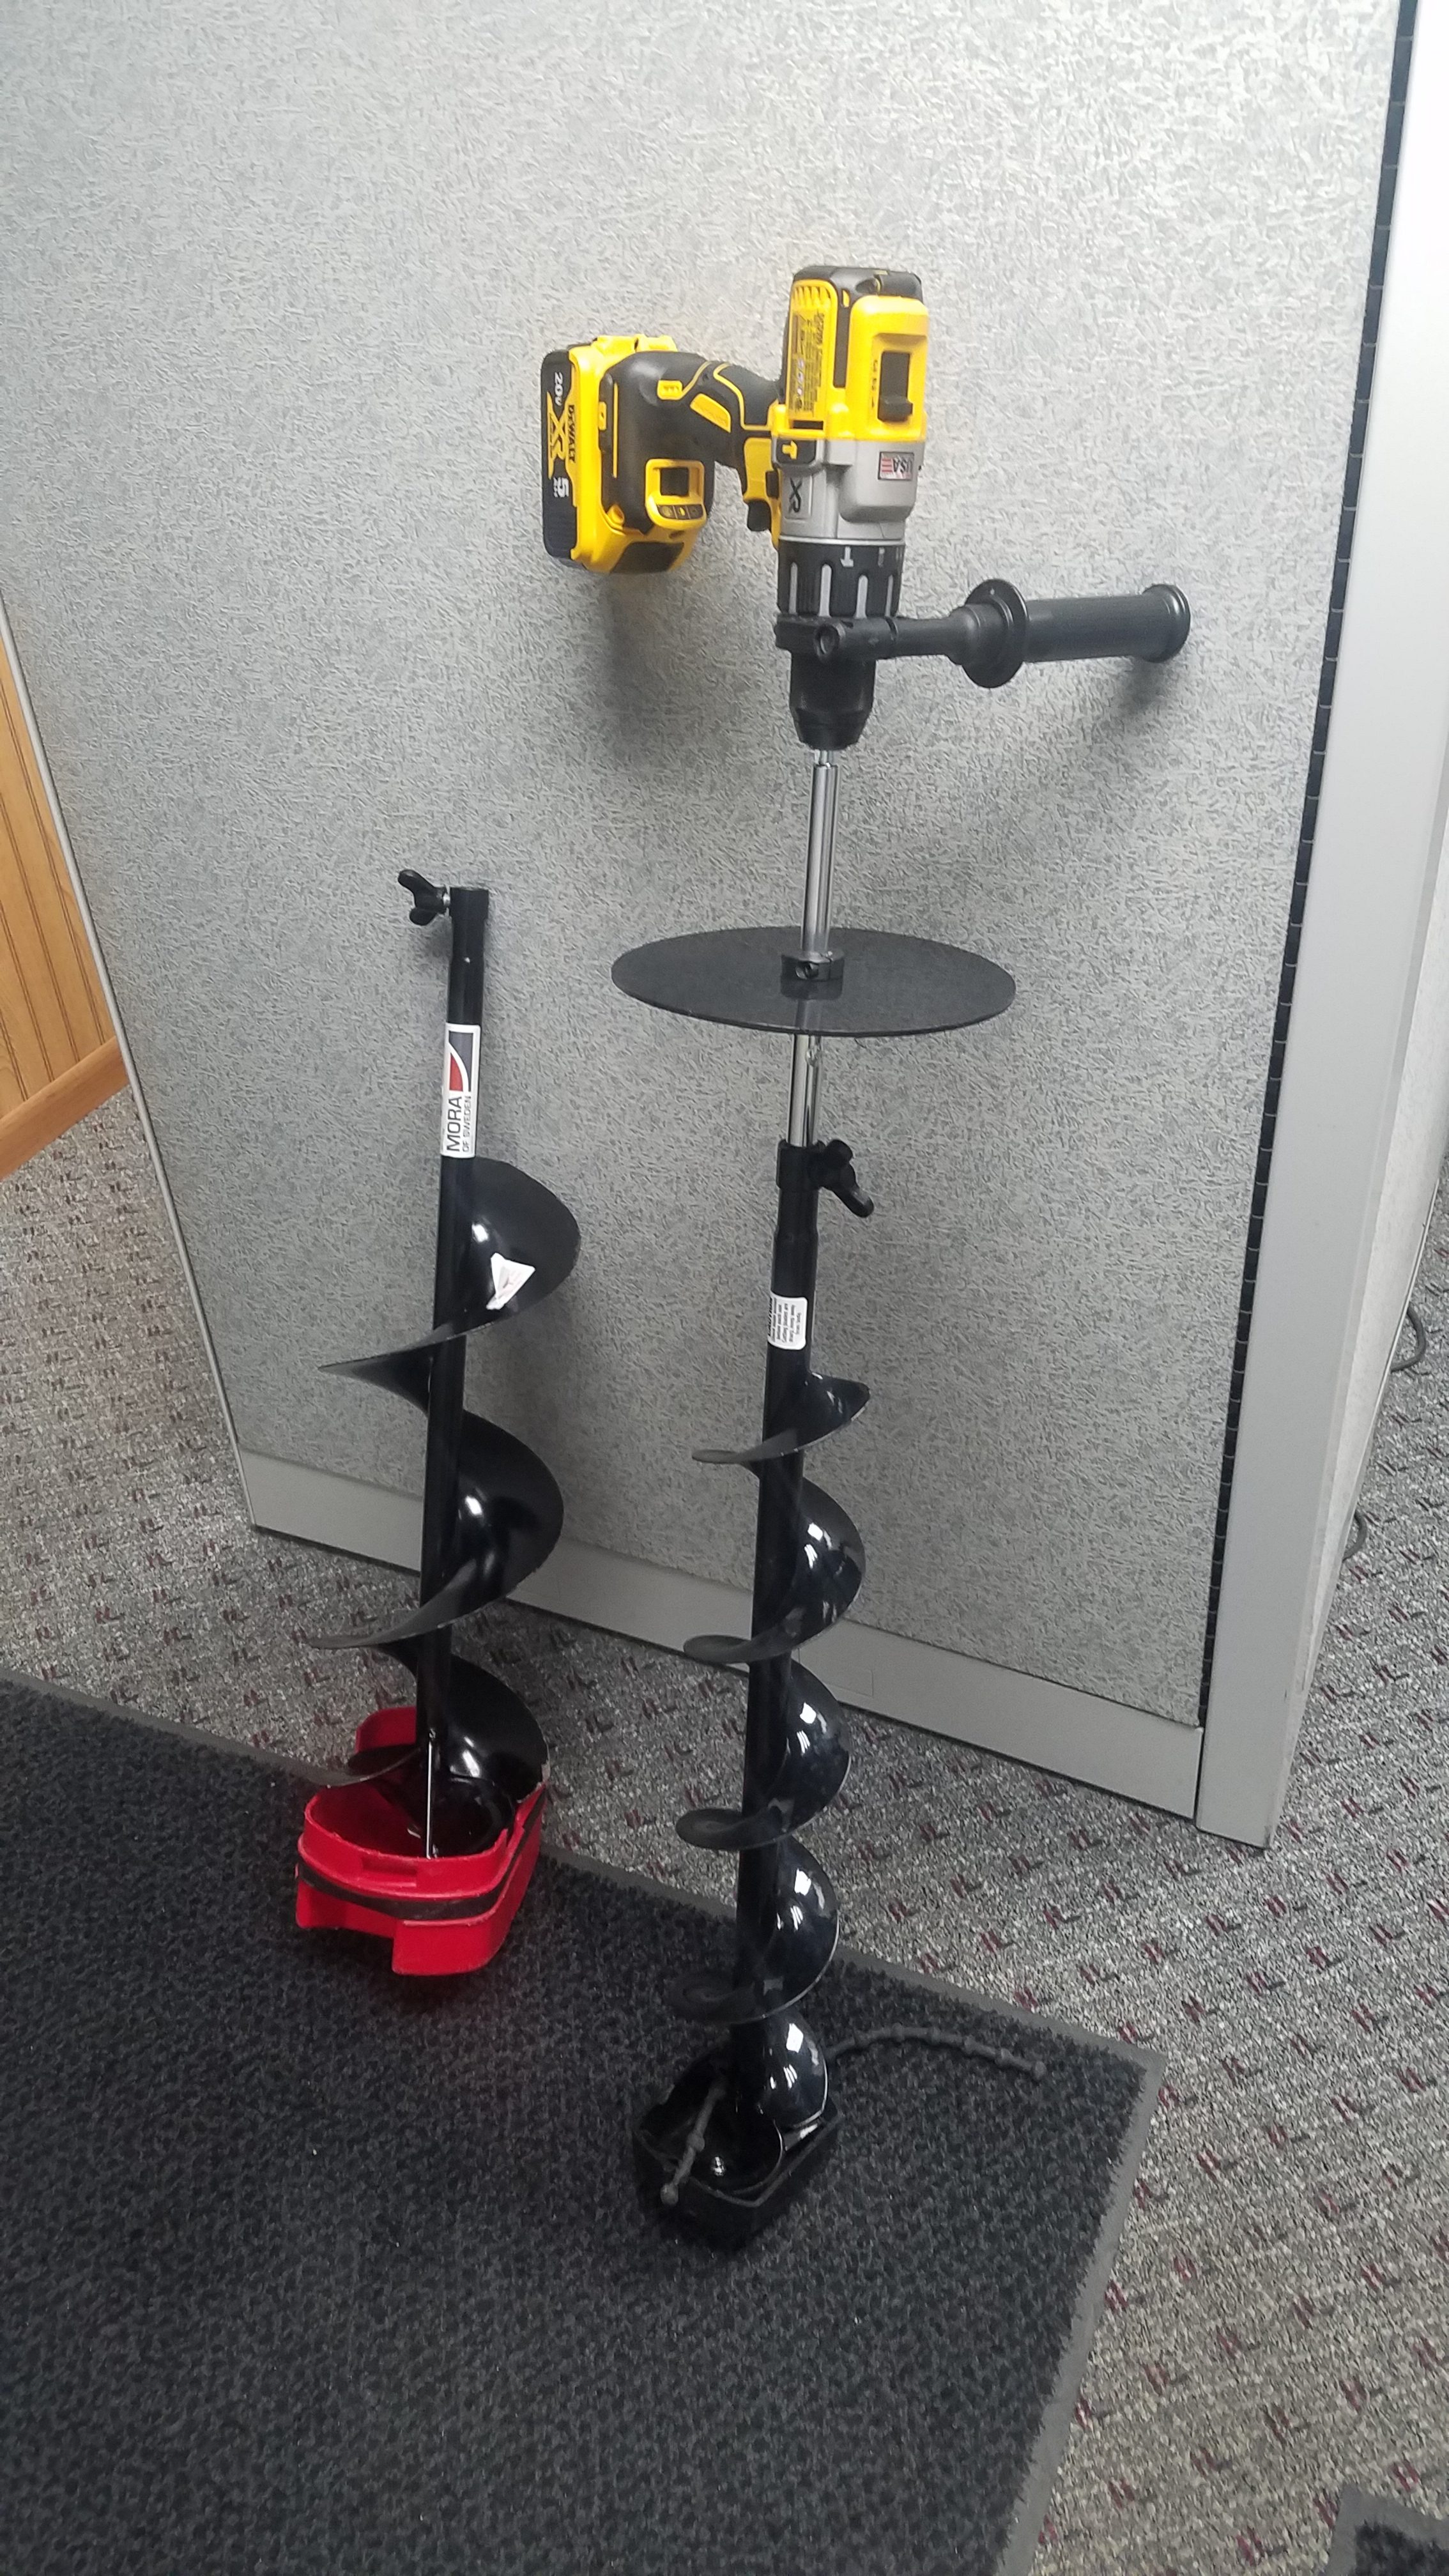 Drill/Auger Combination - Ice Fishing Forum - Ice Fishing Forum